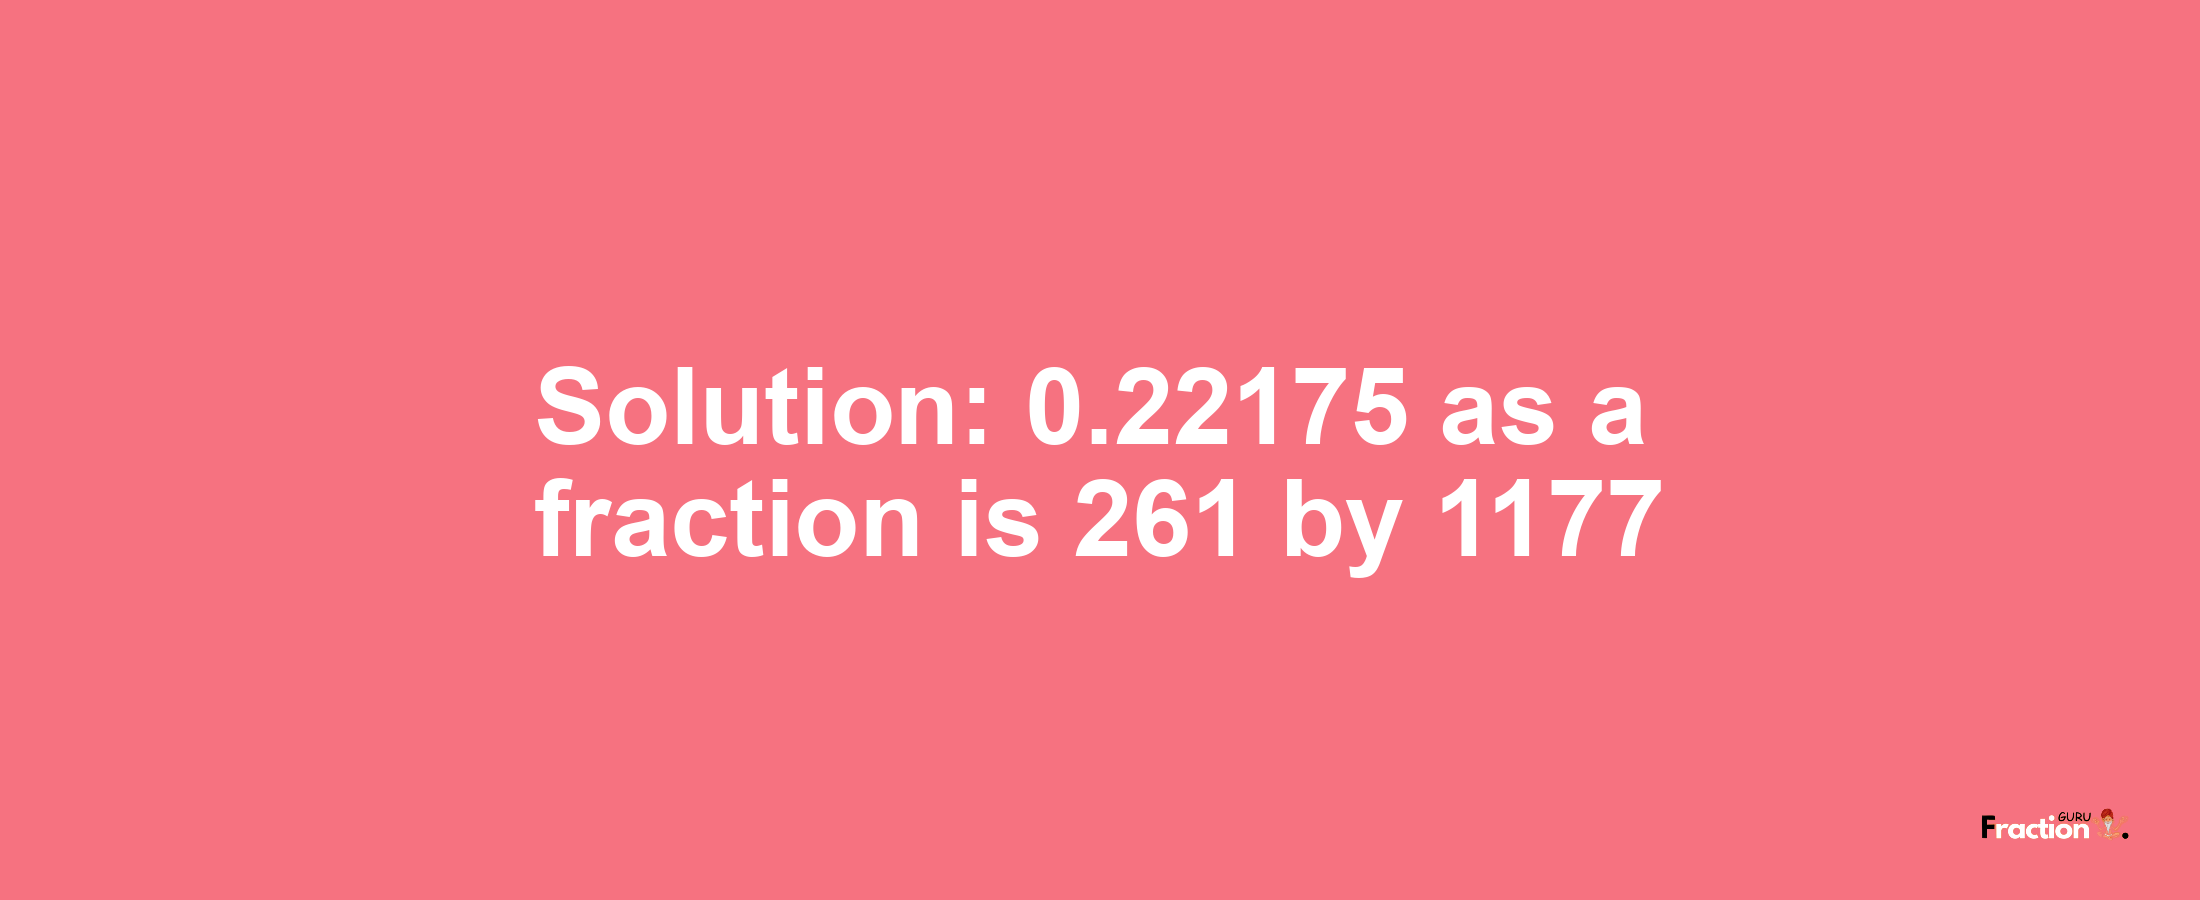 Solution:0.22175 as a fraction is 261/1177